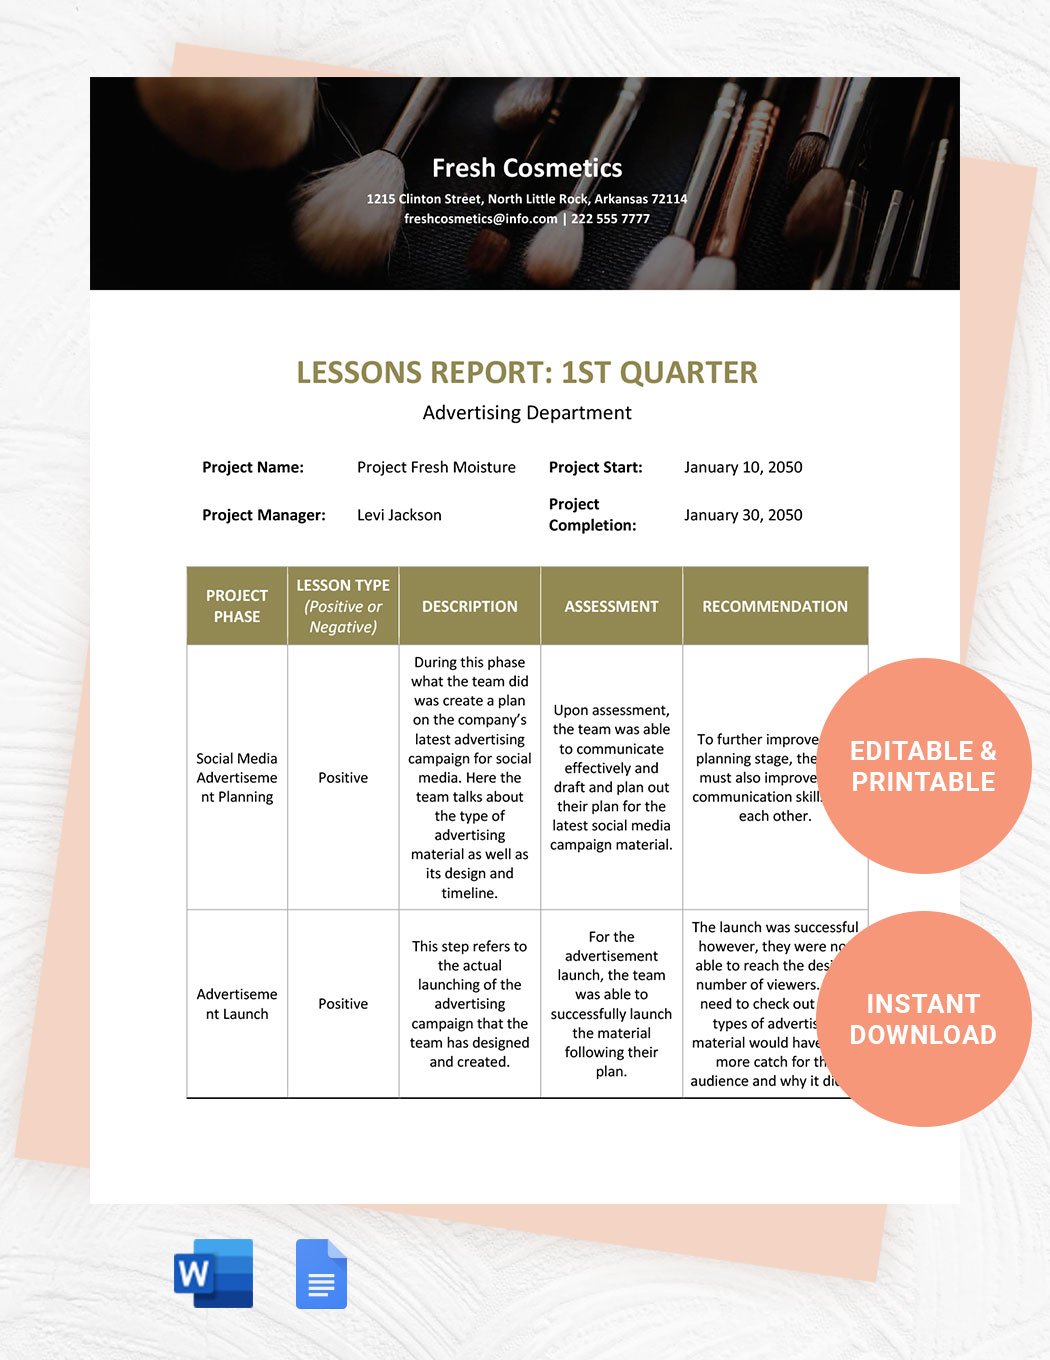 Lessons Learned Report Template in Word, Google Docs